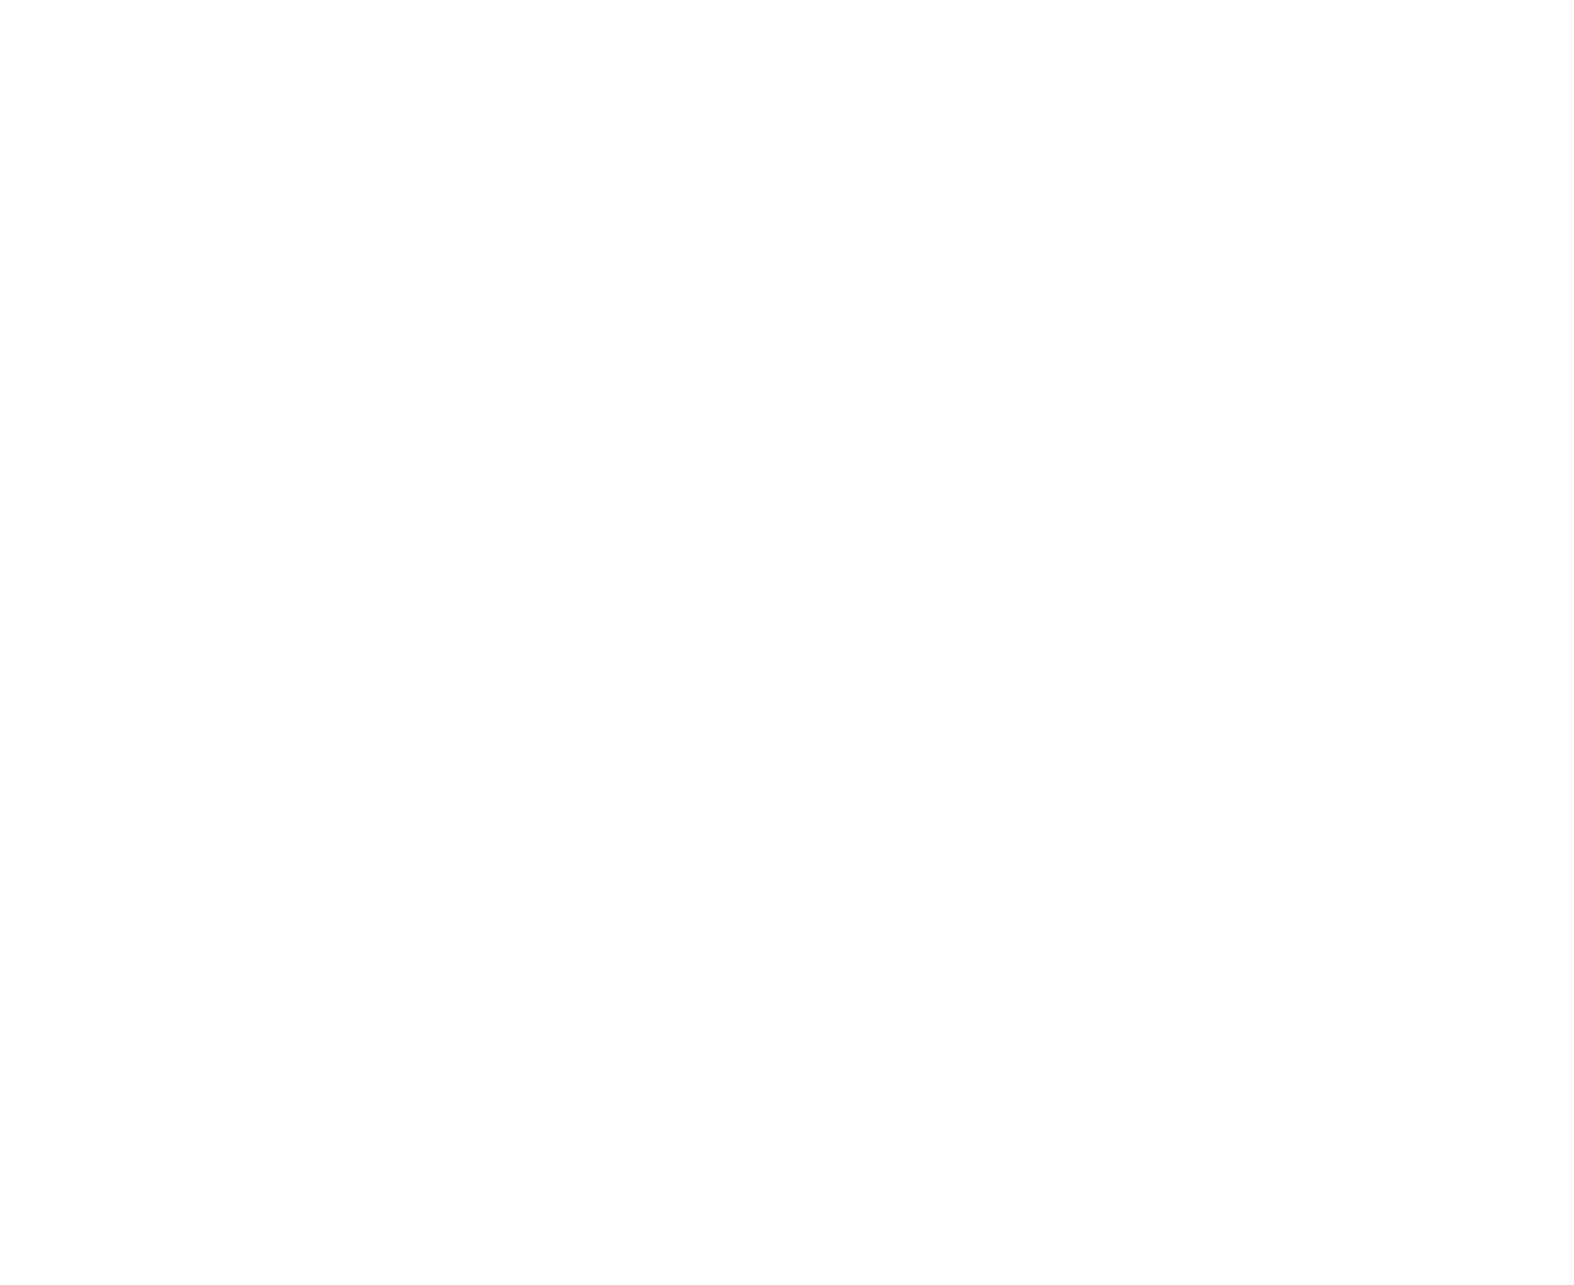 Electricity Generating Public Company logo large for dark backgrounds (transparent PNG)